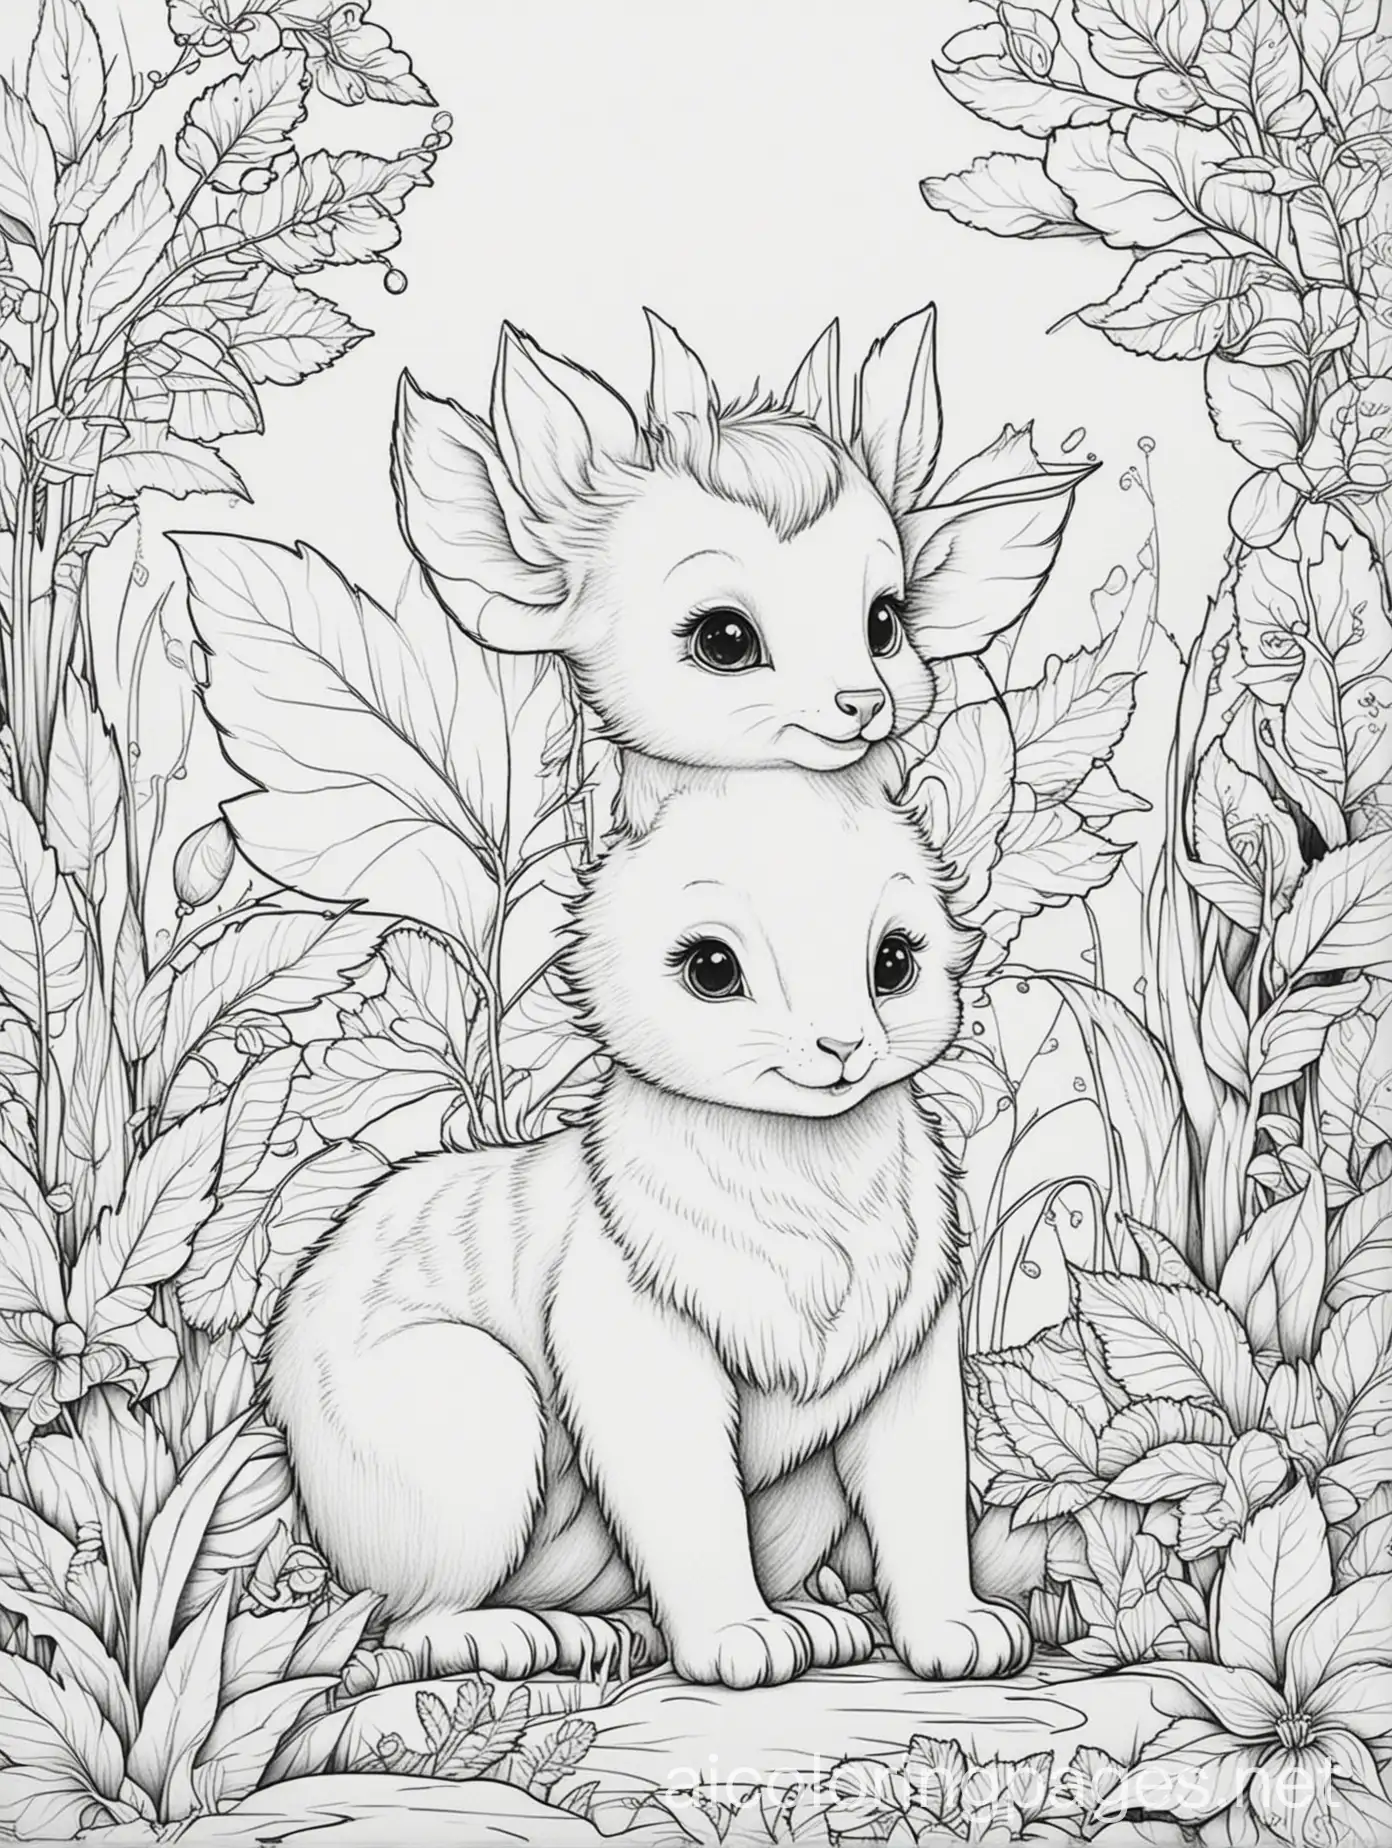 fairytale baby animals, Coloring Page, black and white, line art, white background, Simplicity, Ample White Space. The background of the coloring page is plain white to make it easy for young children to color within the lines. The outlines of all the subjects are easy to distinguish, making it simple for kids to color without too much difficulty